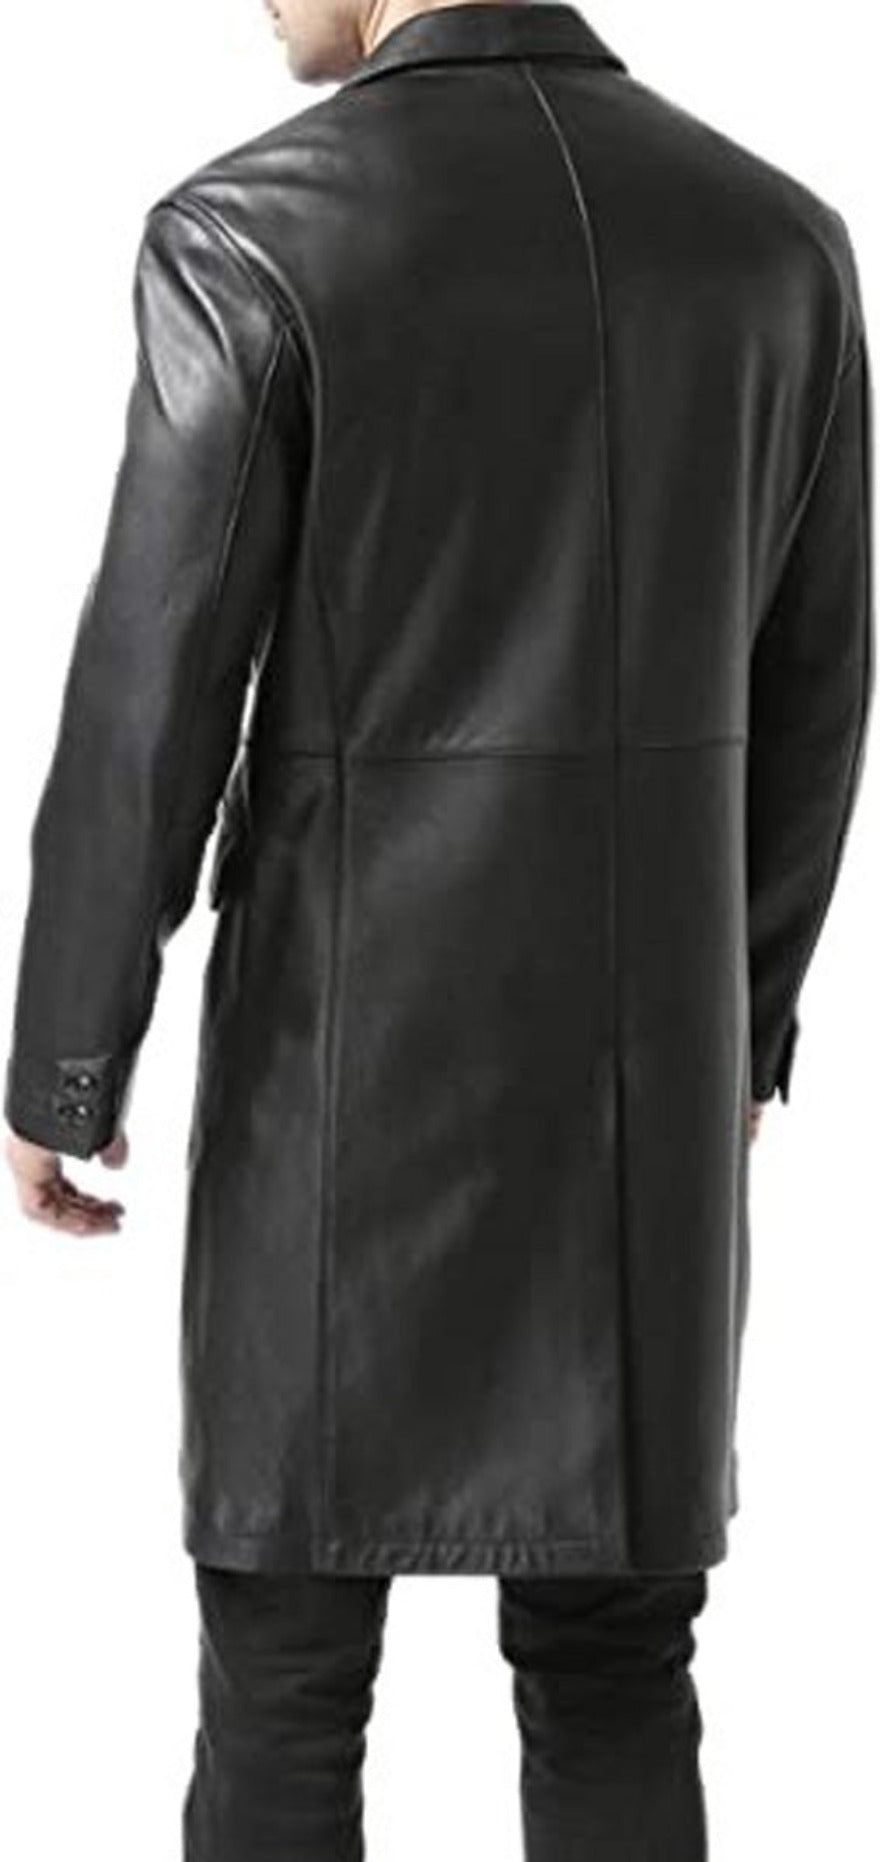 Model wearing our Mens Full Length Black Leather Coat back view.